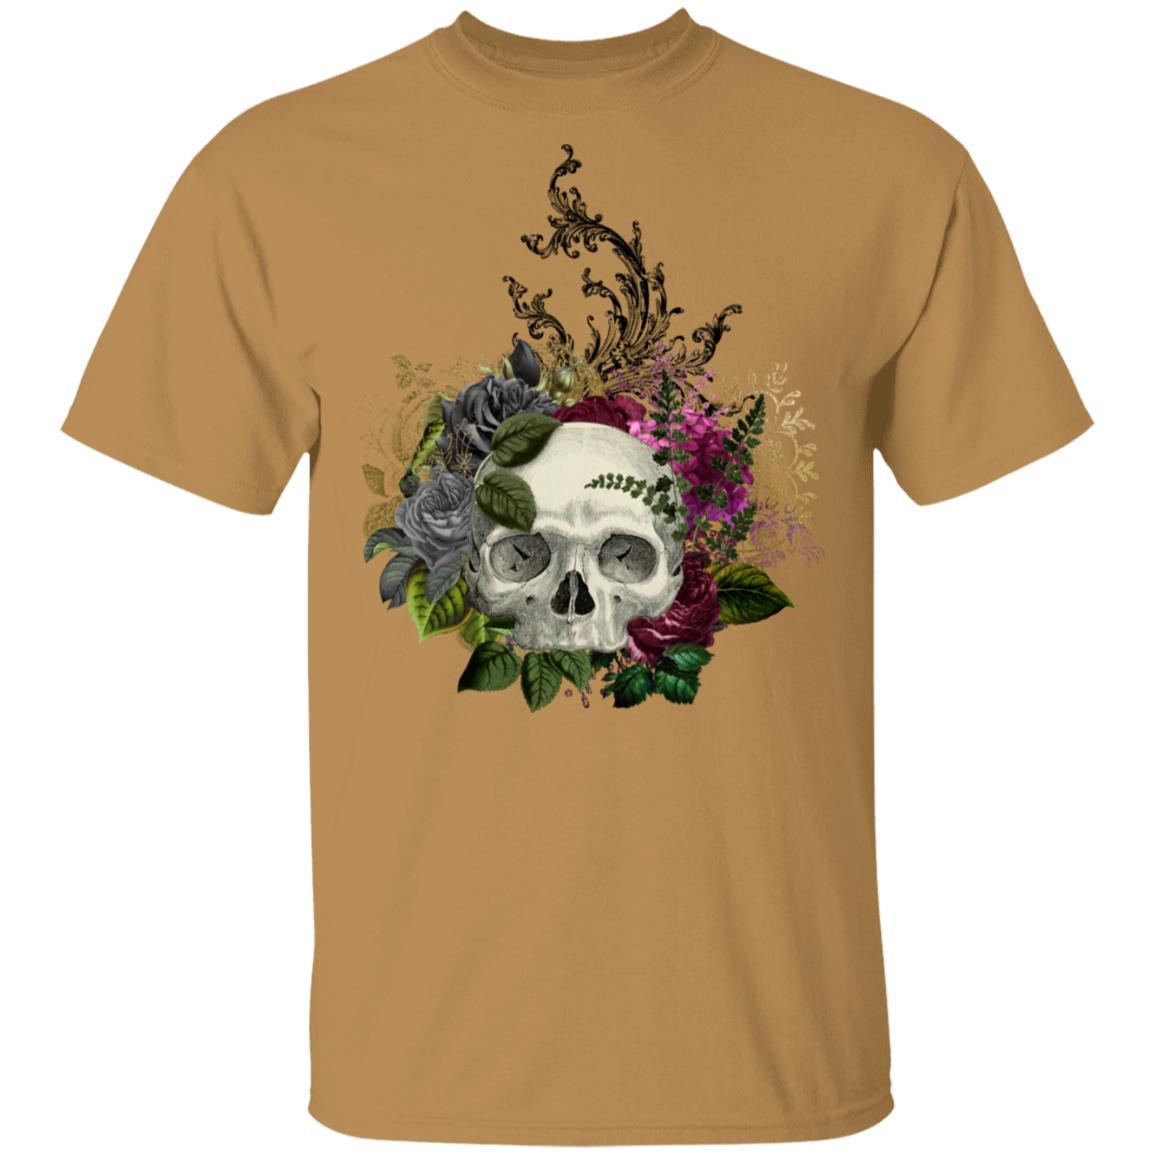 T-Shirts Old Gold / S Winey Bitches Co Skull Design #1 5.3 oz. T-Shirt WineyBitchesCo